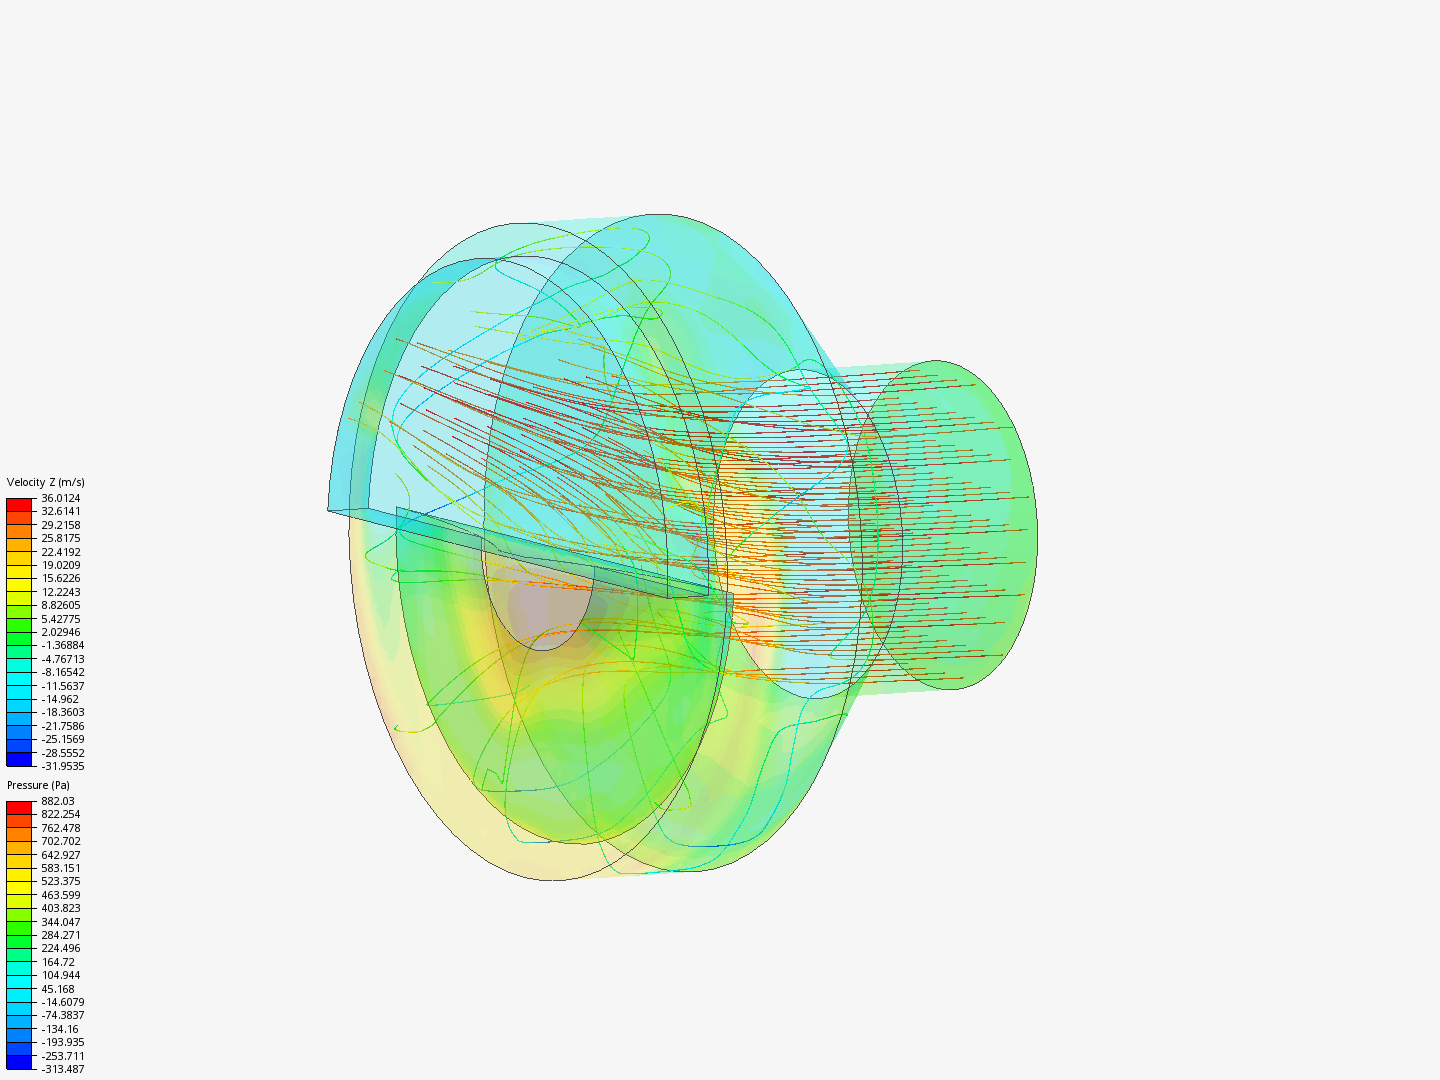 Resppy_v2.0_CFD_0 image